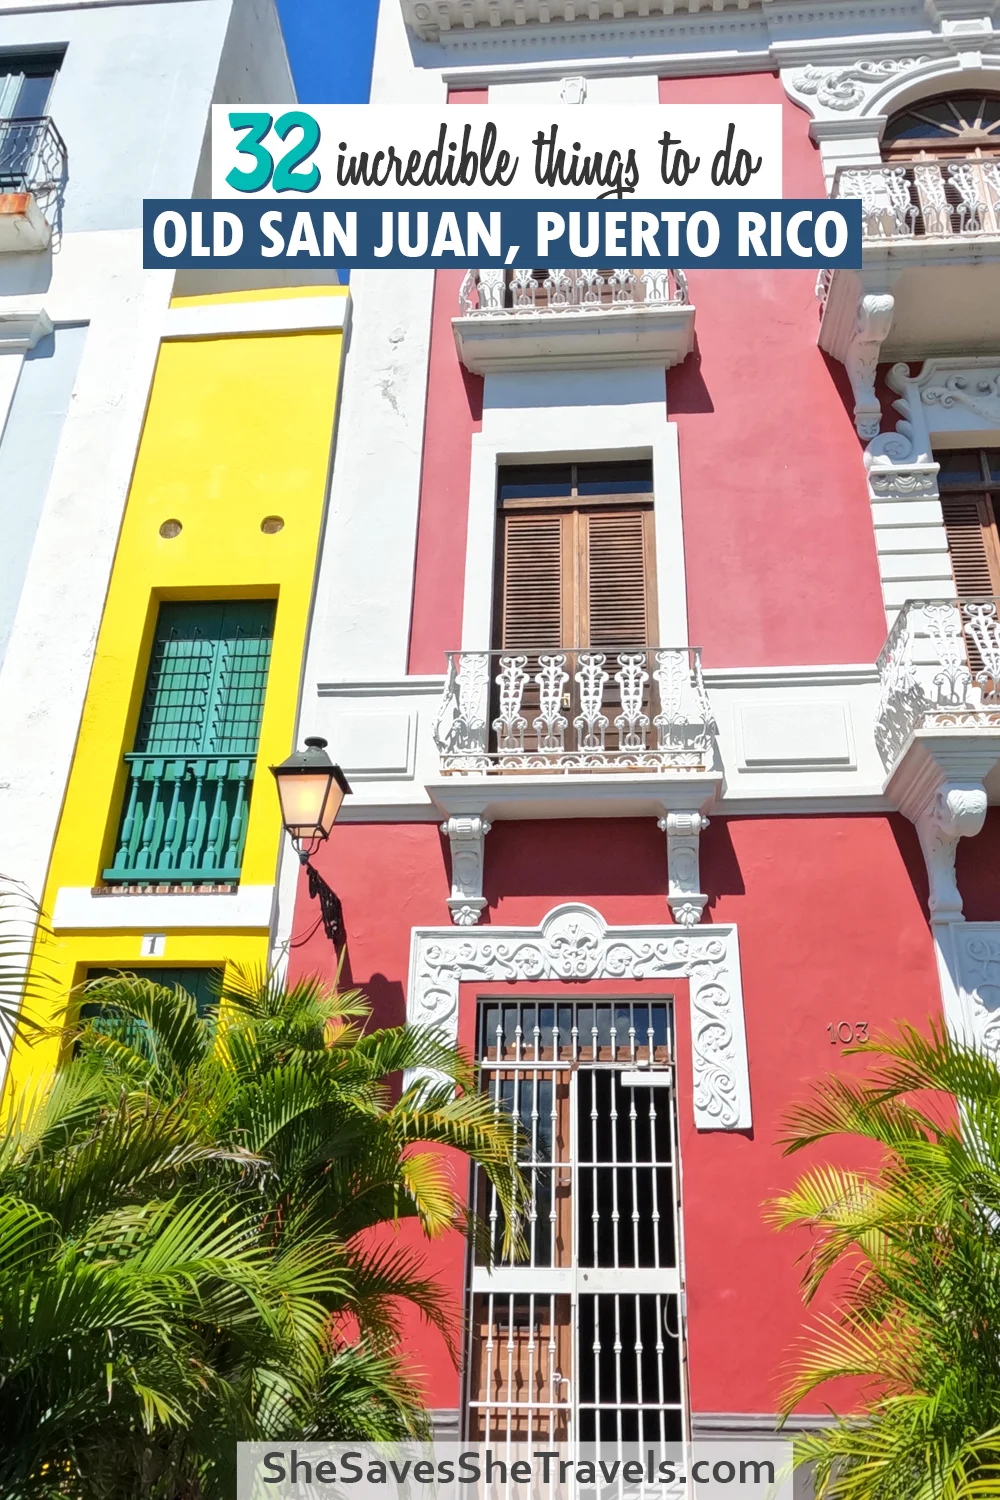 text that reads 32 incredible things to do Old San Juan, Puerto Rico with photo of colorful buildings and palm trees